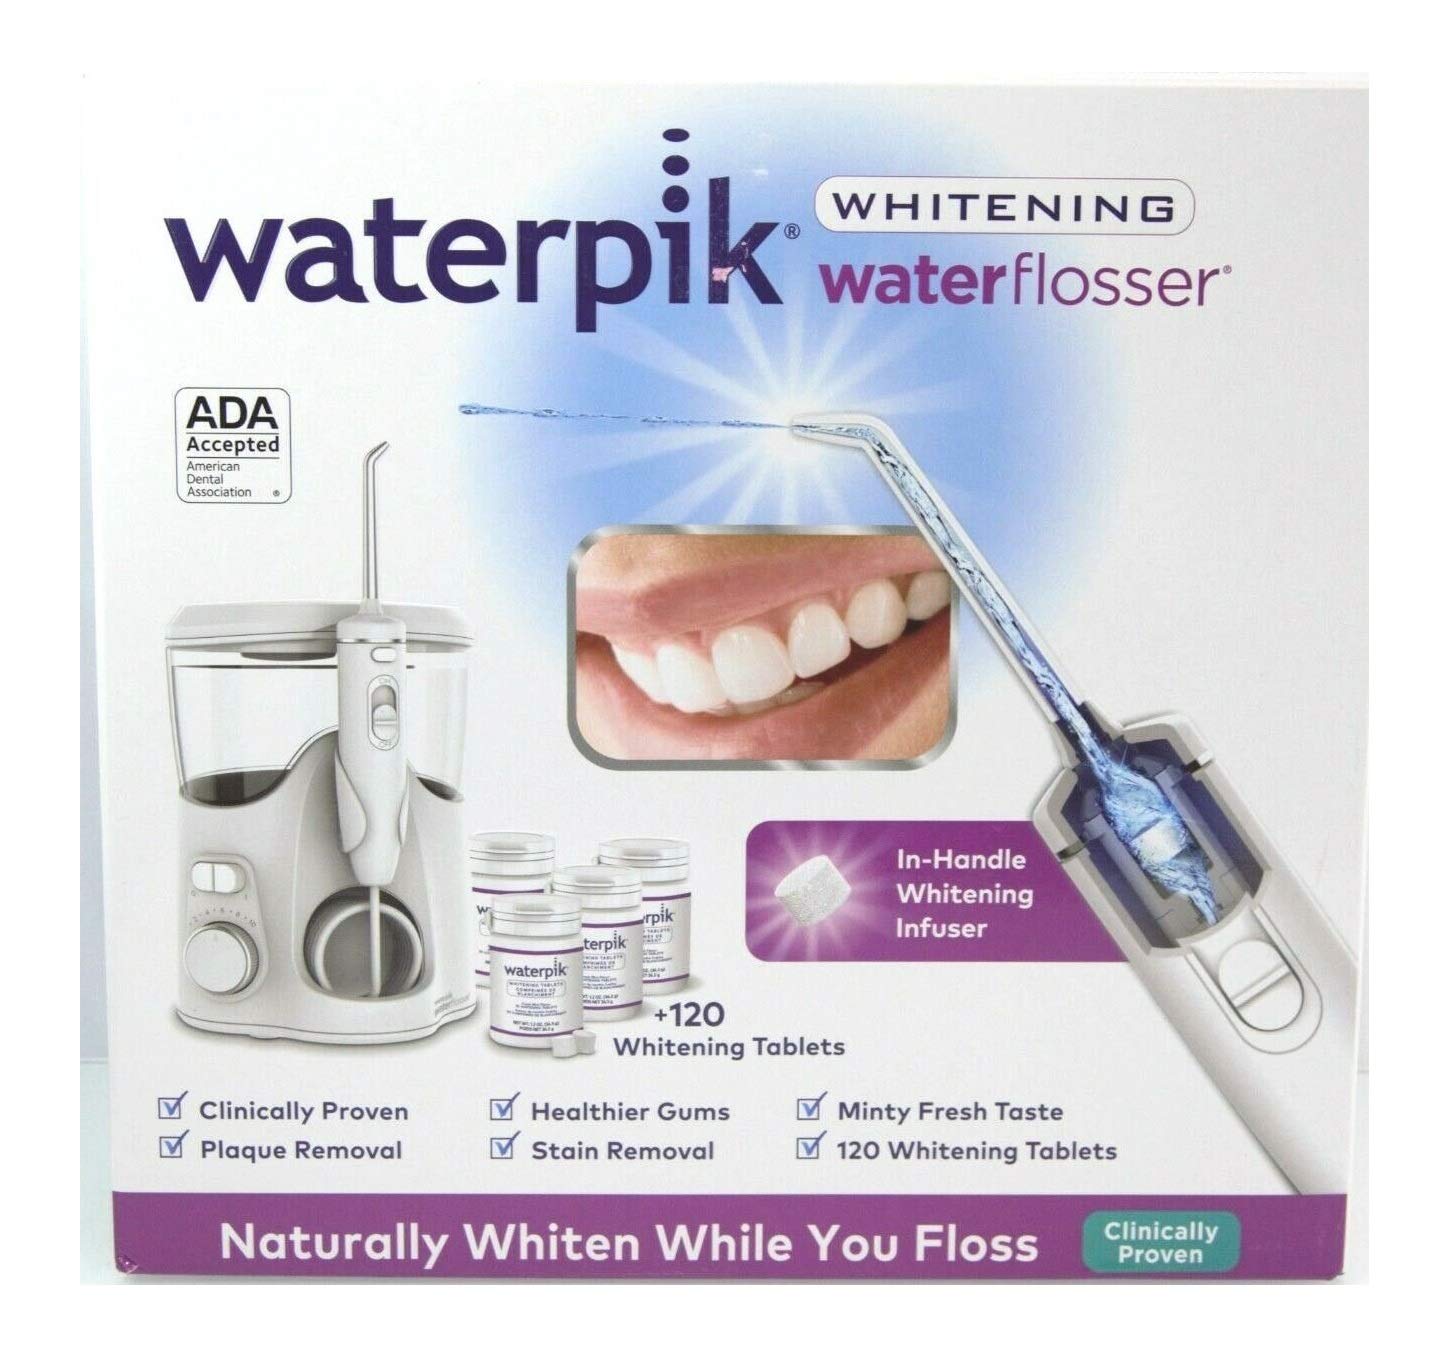 WaterPik WaterFlosser Whitening - 120 Tablets - 6 Tip - Get a Whiter Smile and Fresher Breath